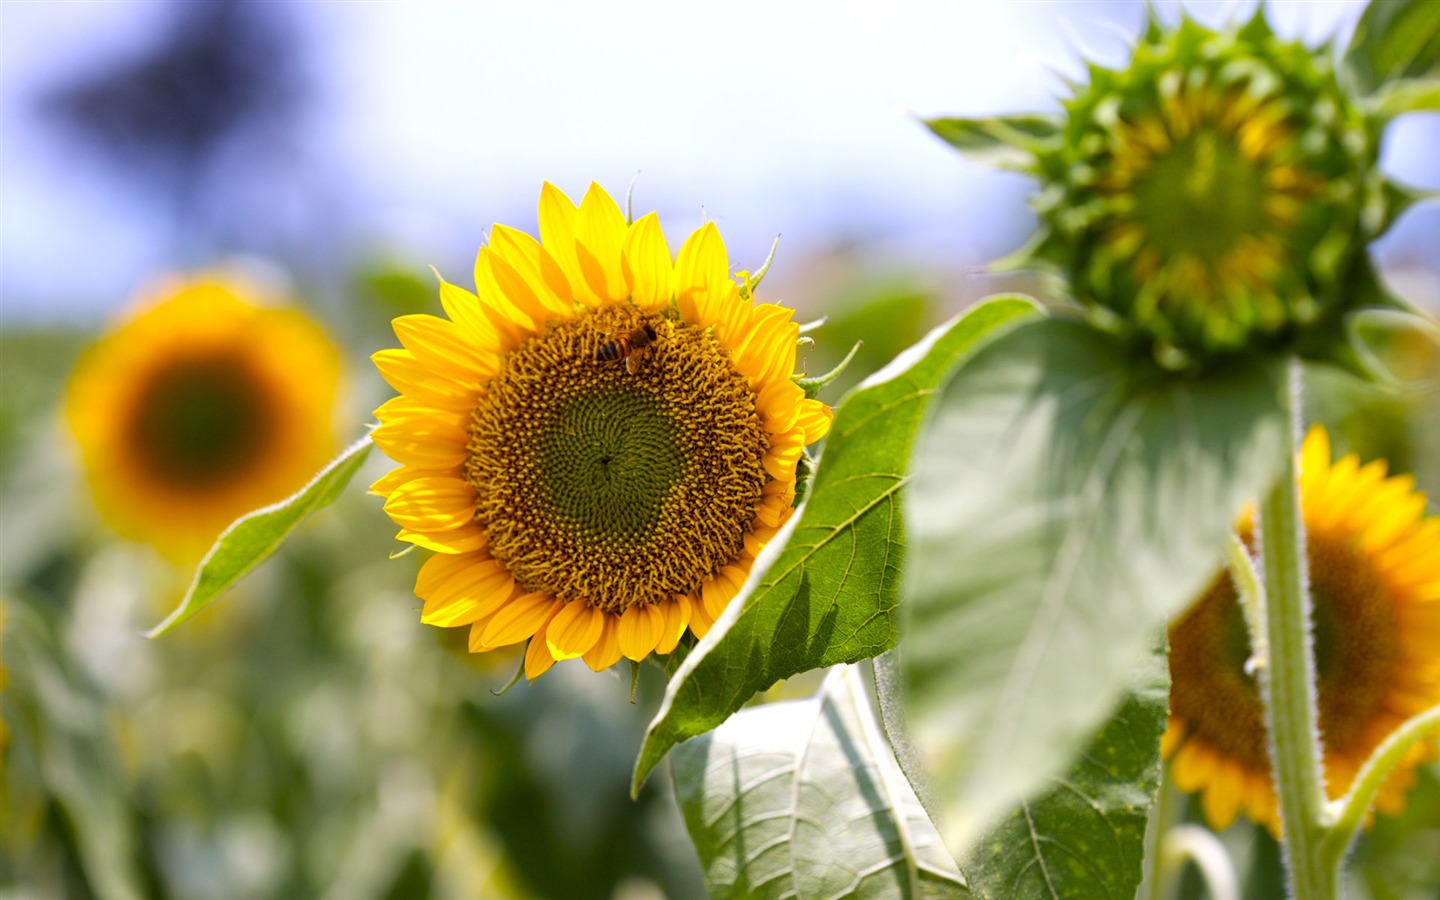 Sunny sunflower photo HD Wallpapers #21 - 1440x900